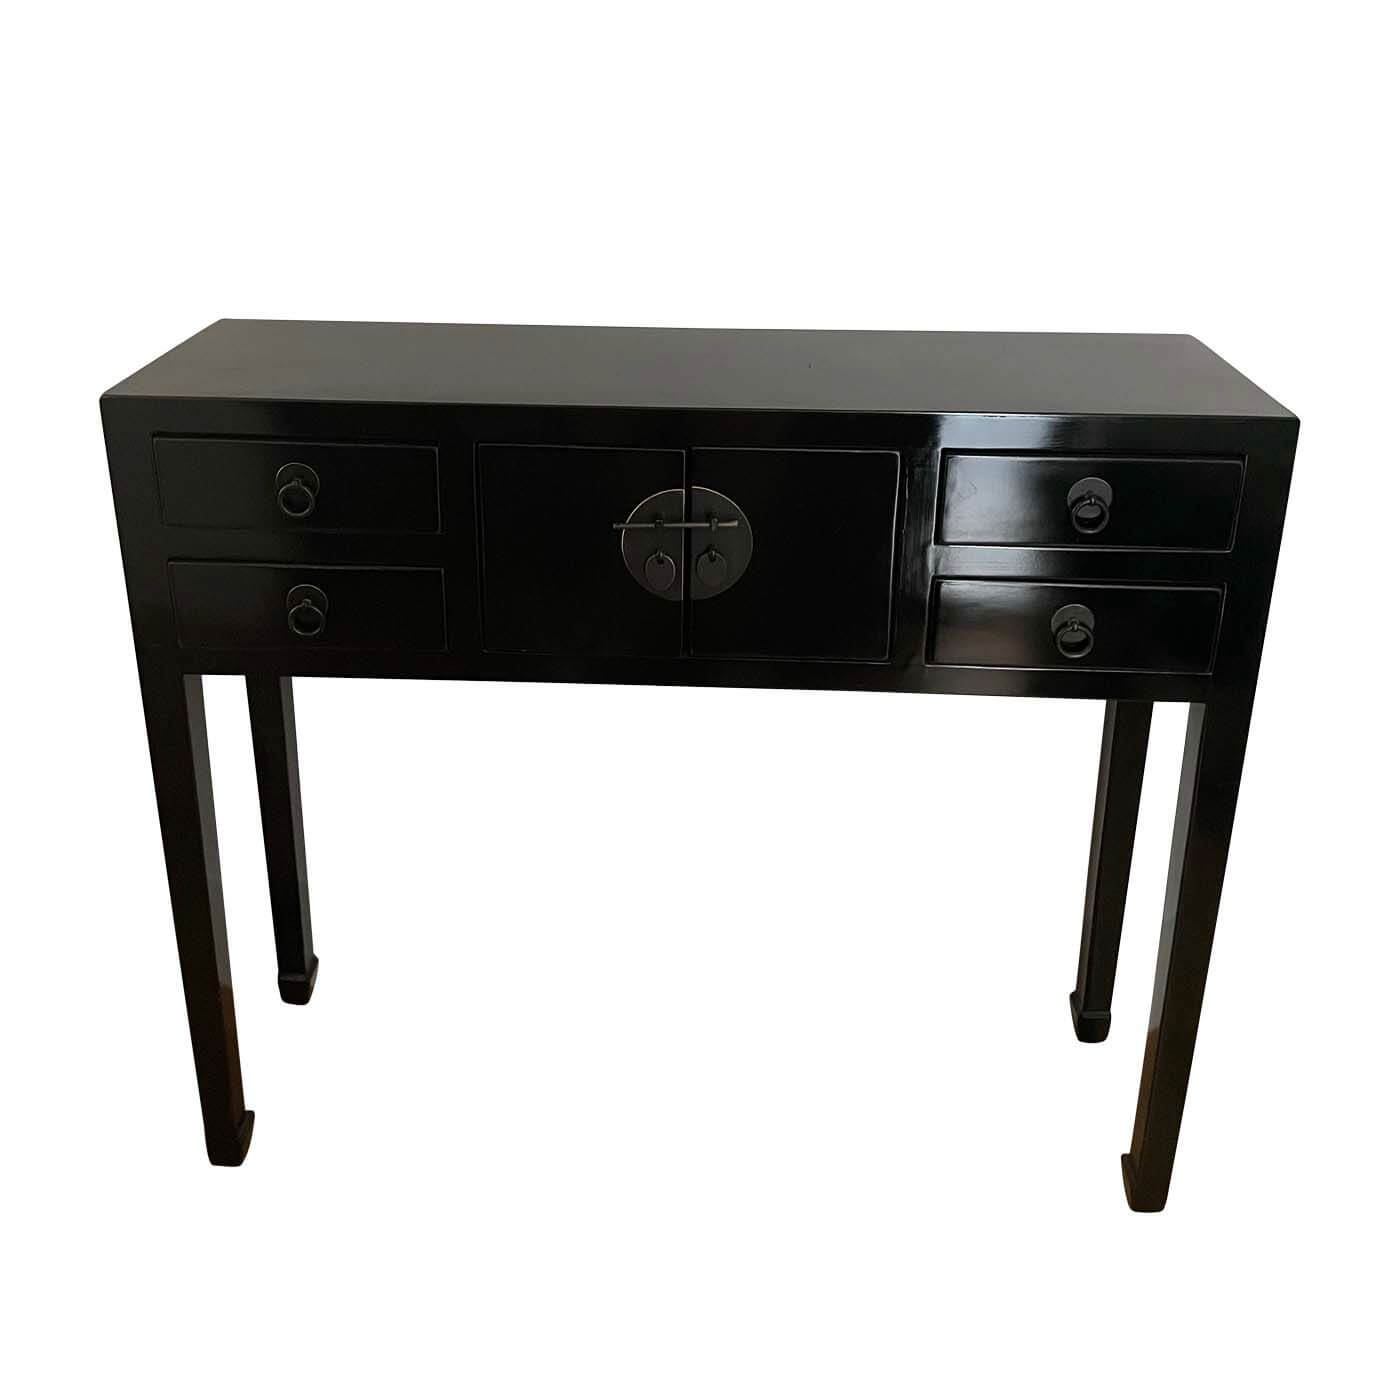 Two Design Lovers chinese black console table